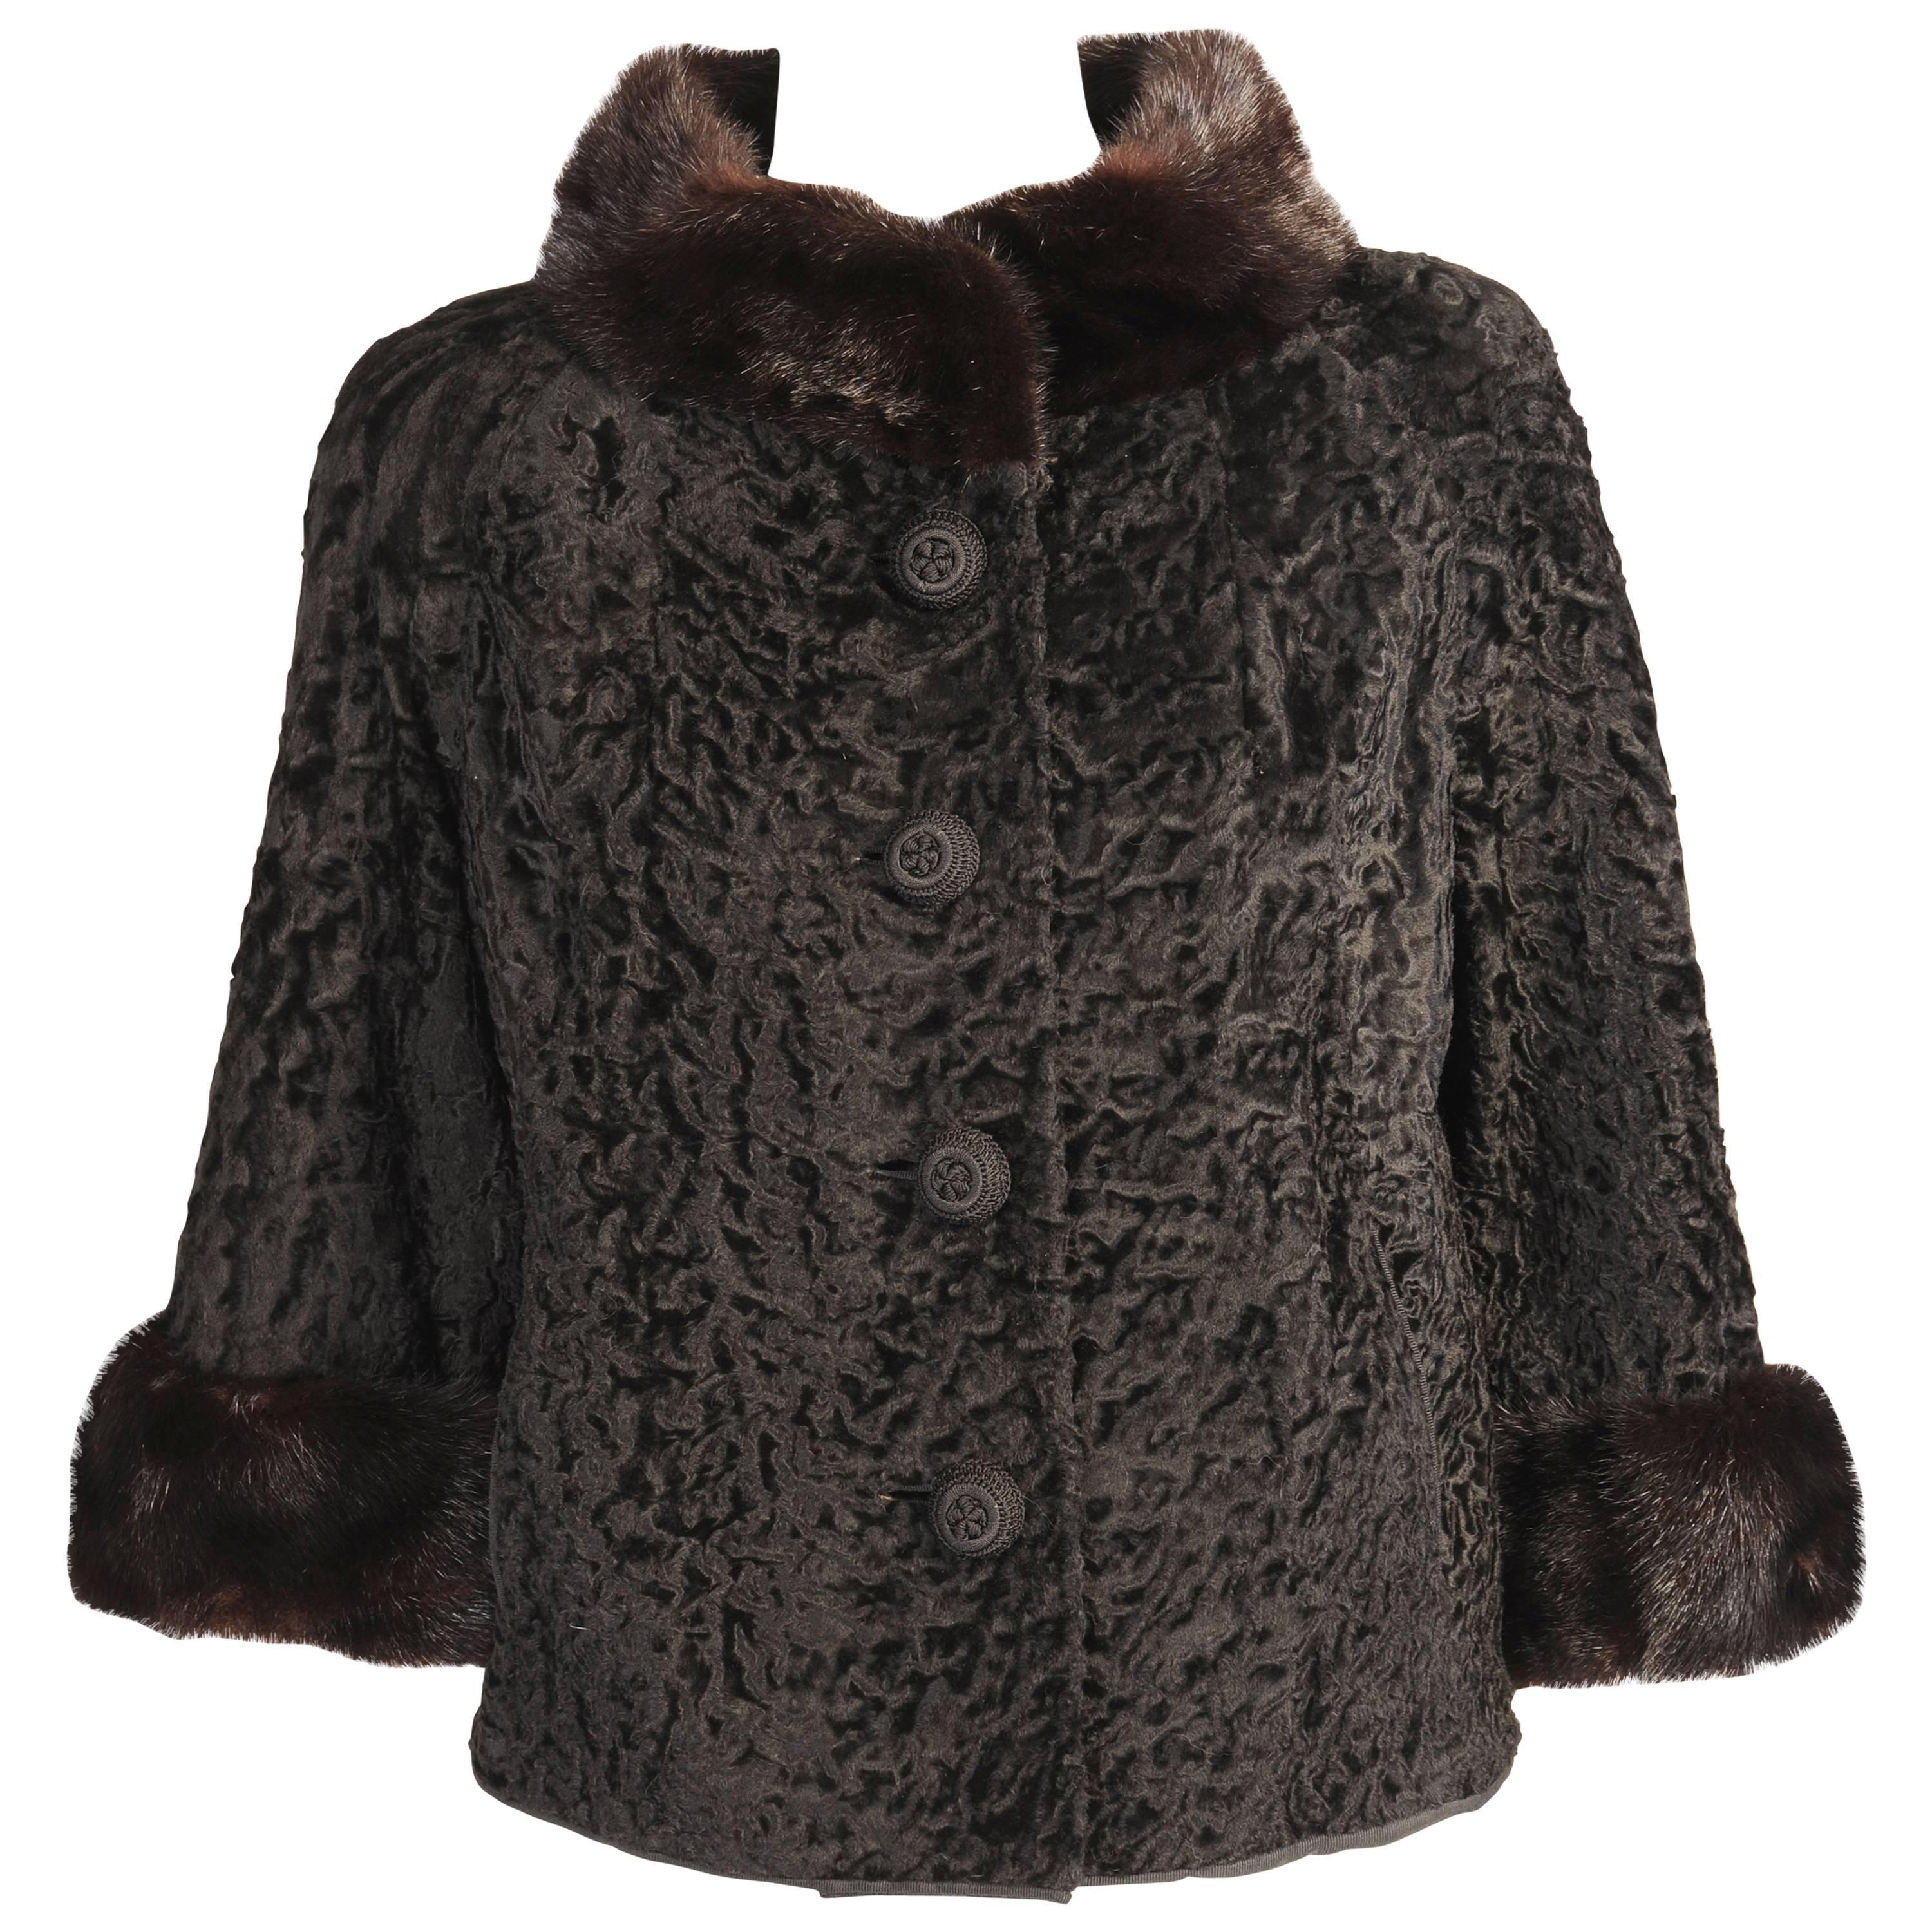 Black Broadtail and Ranch Mink Evening Jacket